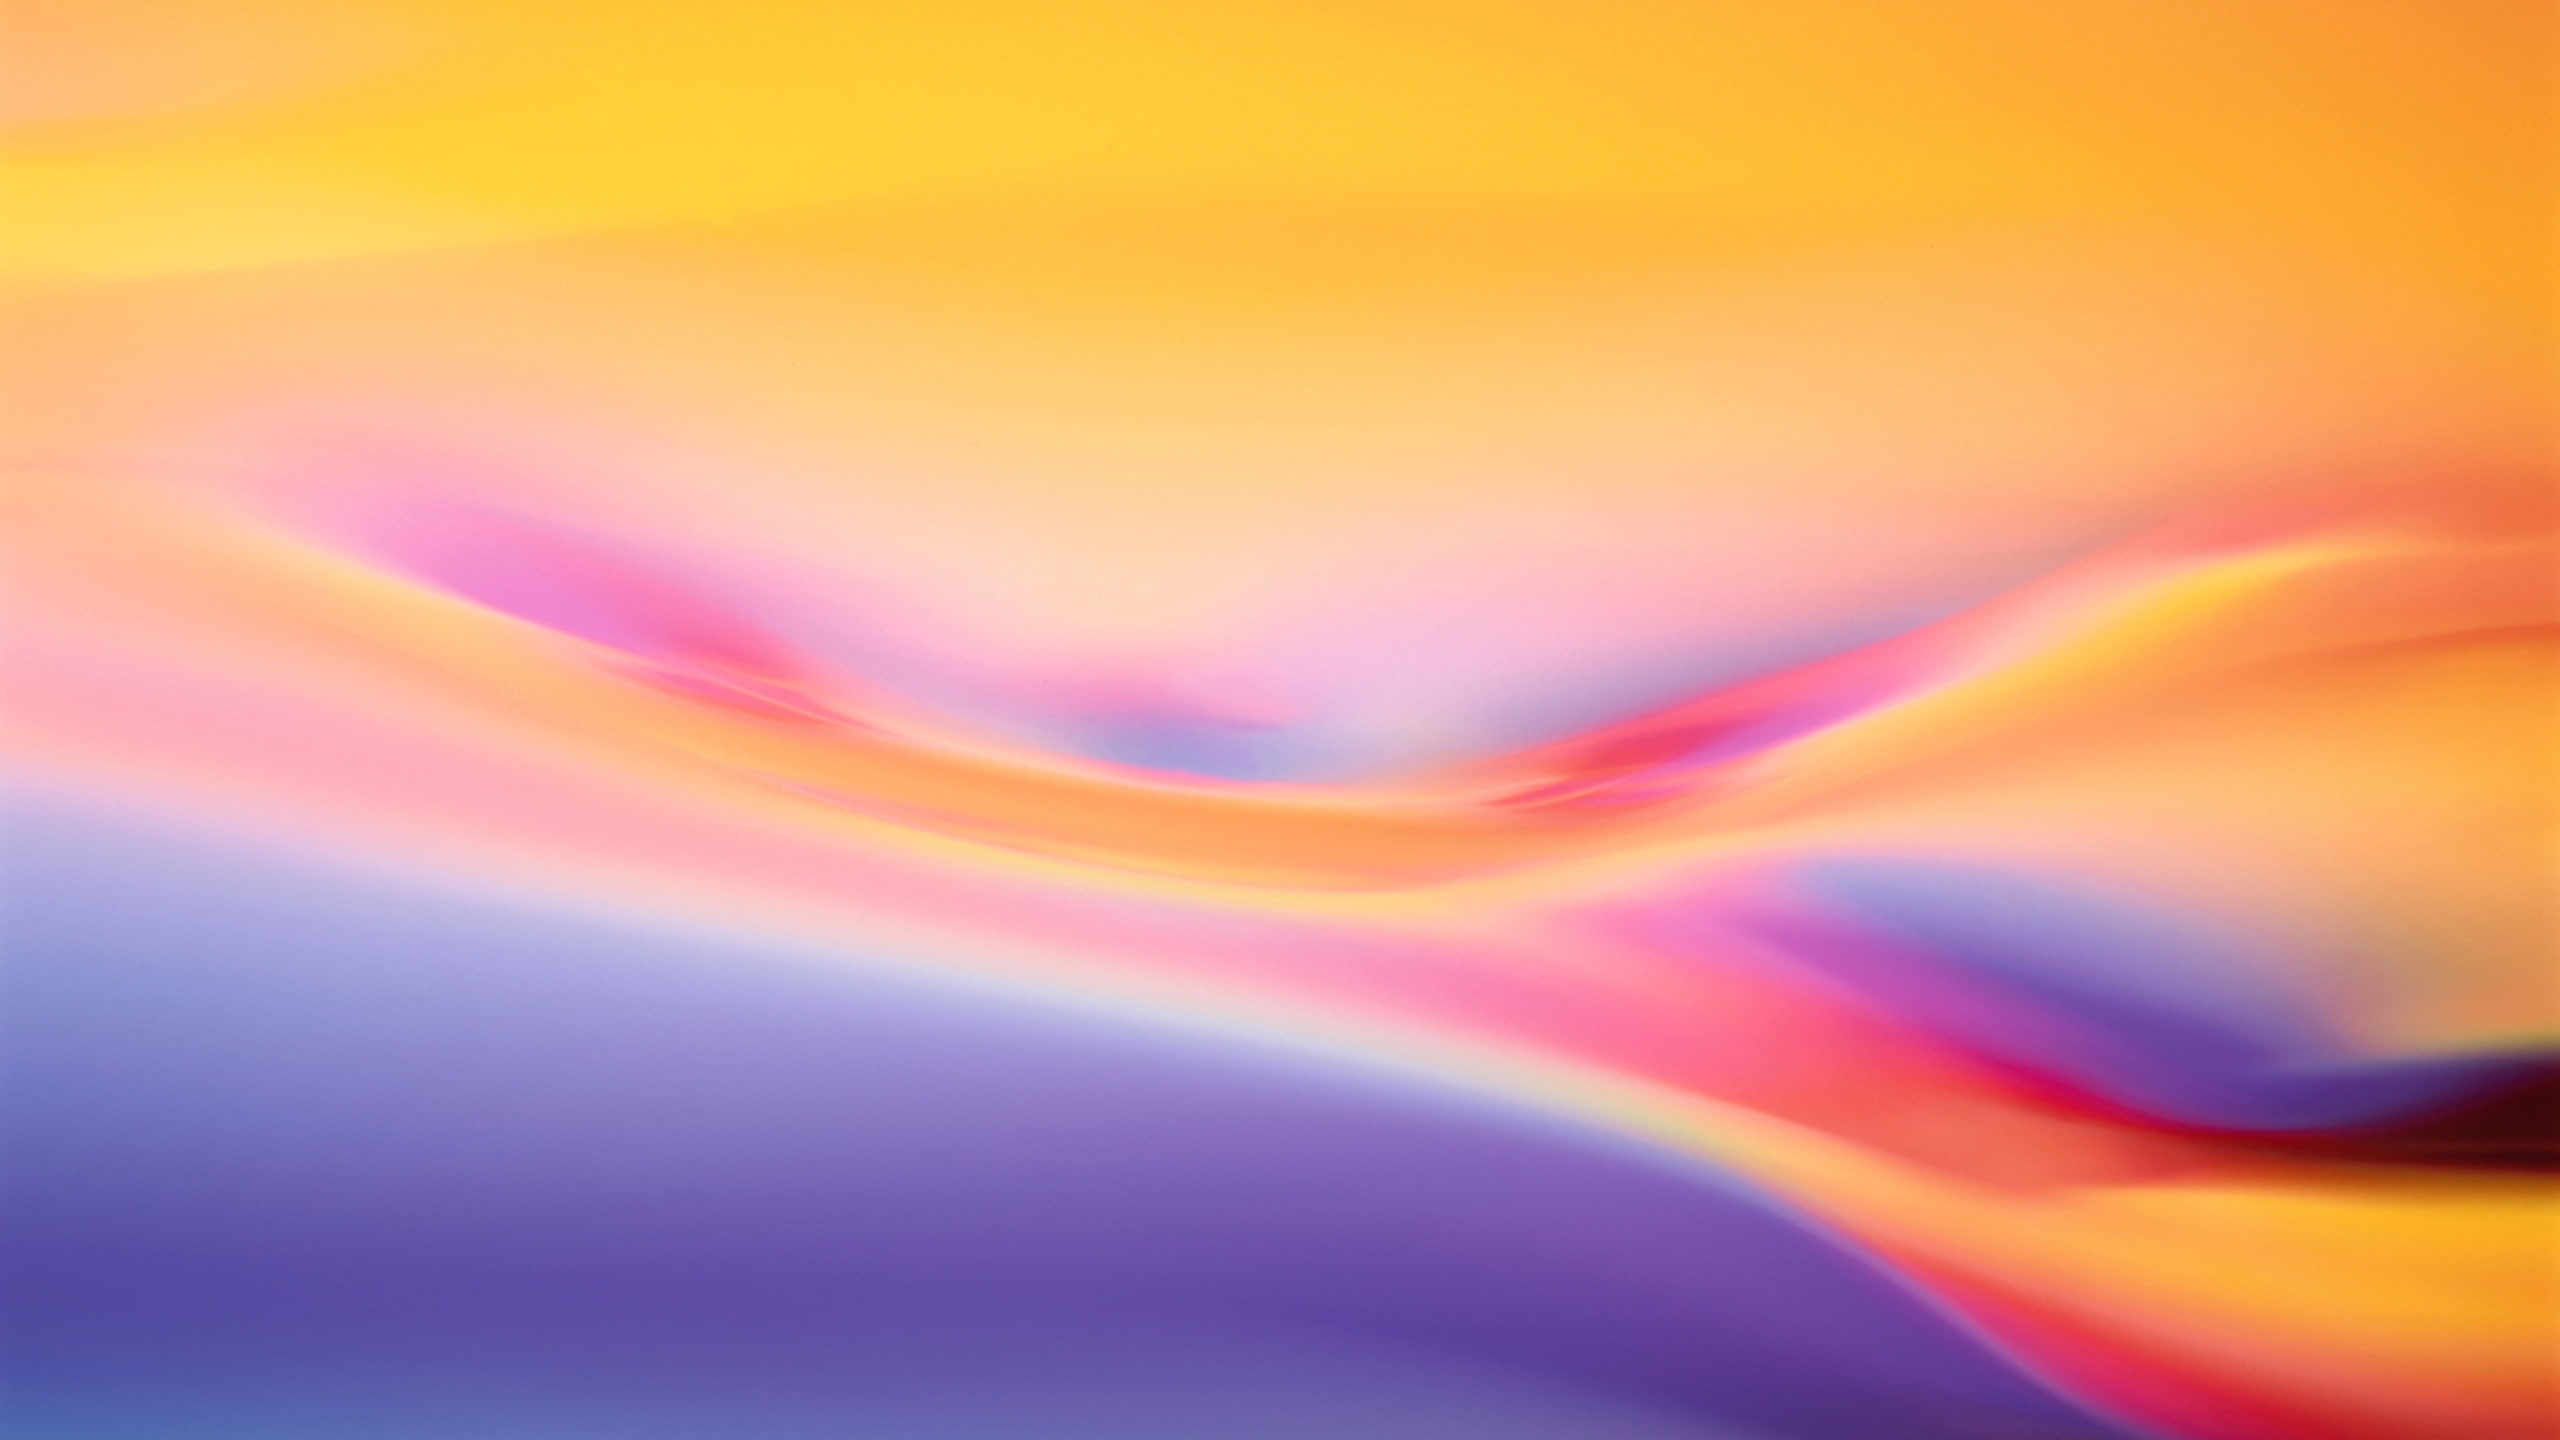 Abstract, Warm, Colorful